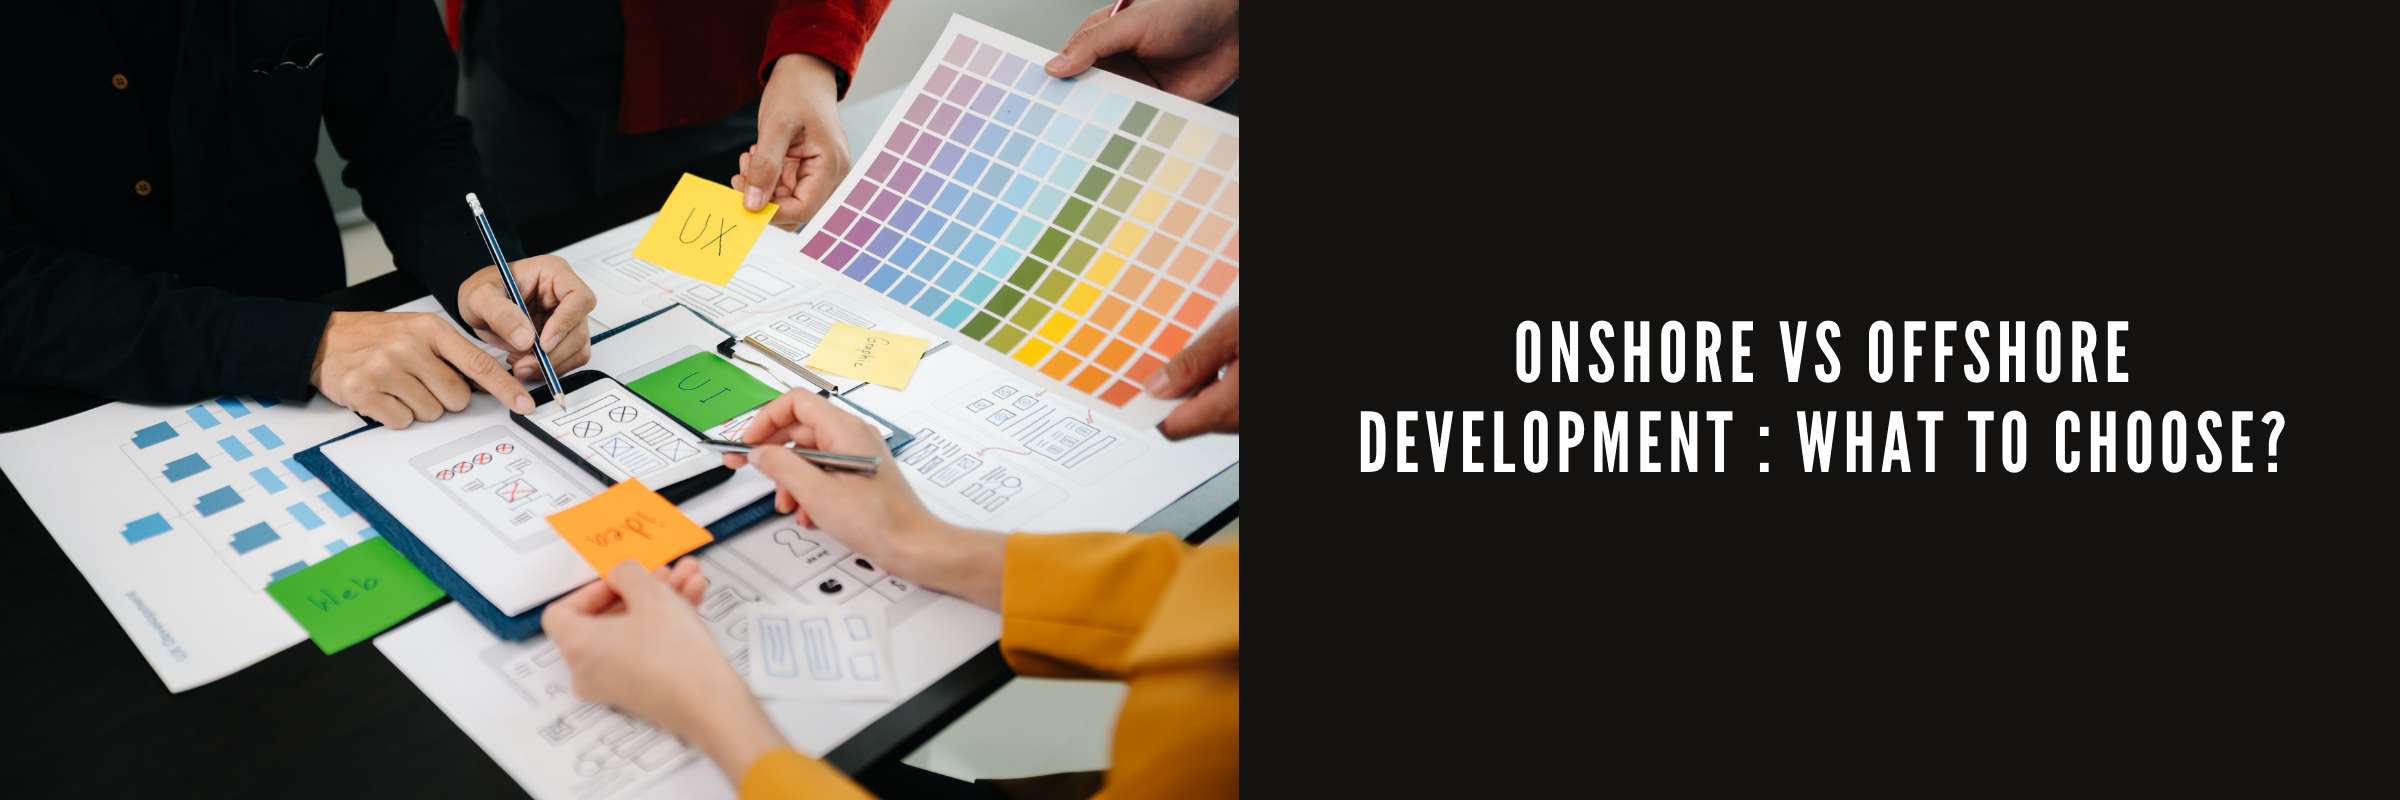 Onshore vs Offshore Software Development: What to choose?